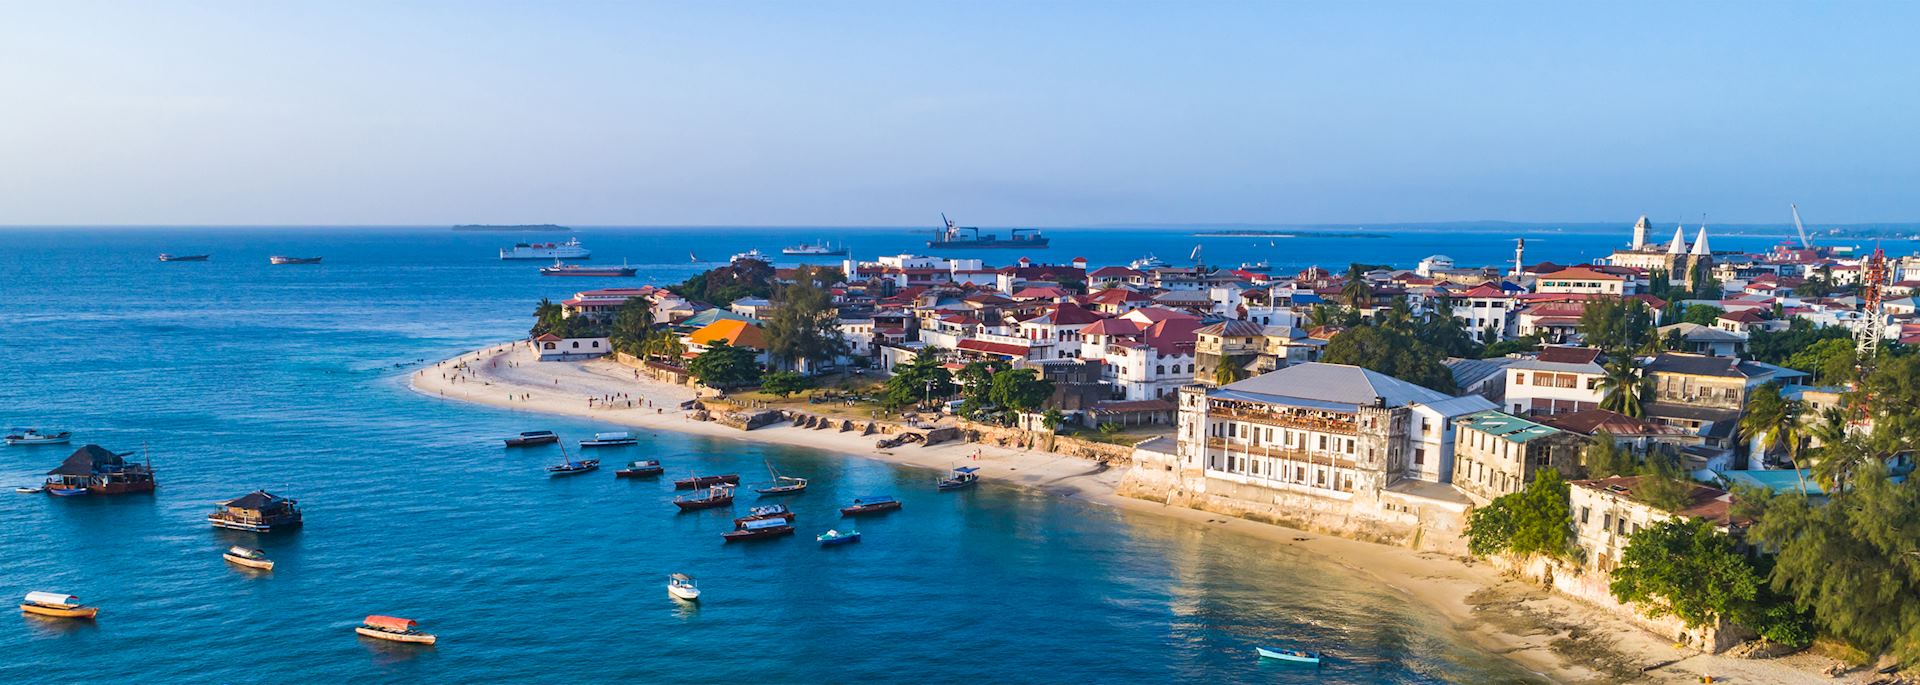 Aerial view of Stone Town